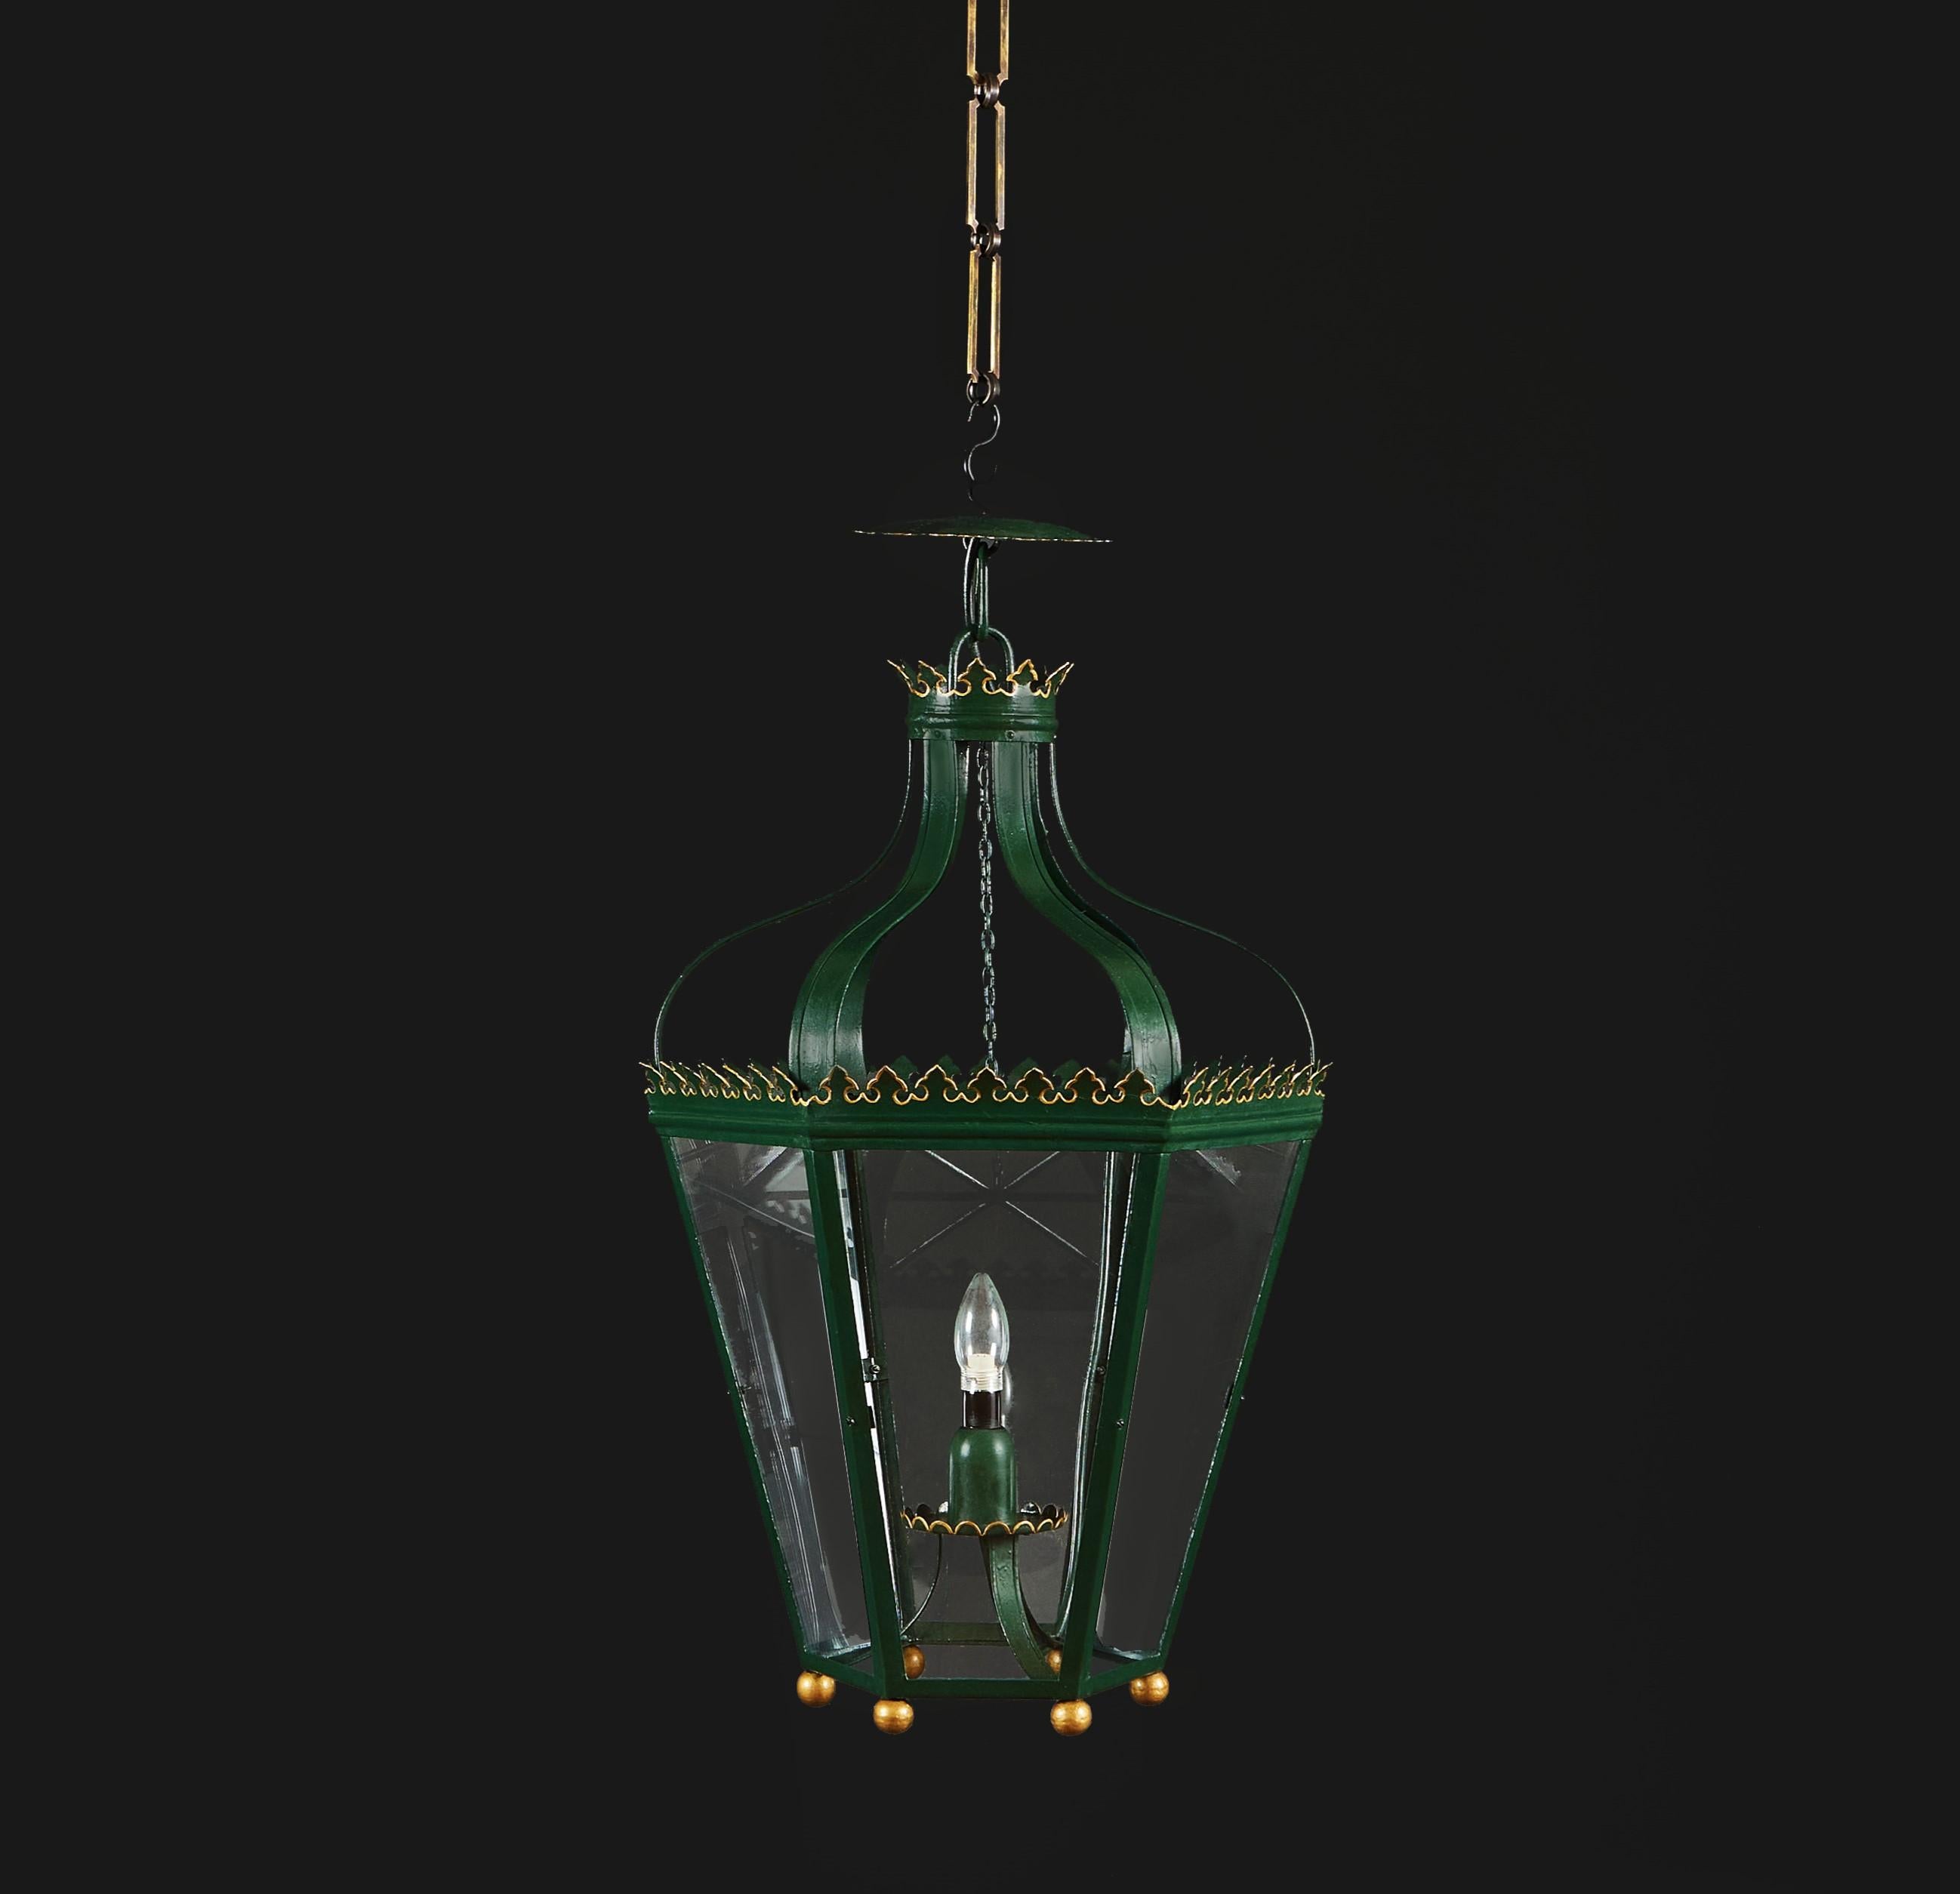 England, circa 1870

A late 19th Century neo-gothic hanging lantern, with green tolework and contrasting gilt details.

Height 68 cm.

Diameter 43 cm.

Chain available upon request. Please see image of available options and contact us for